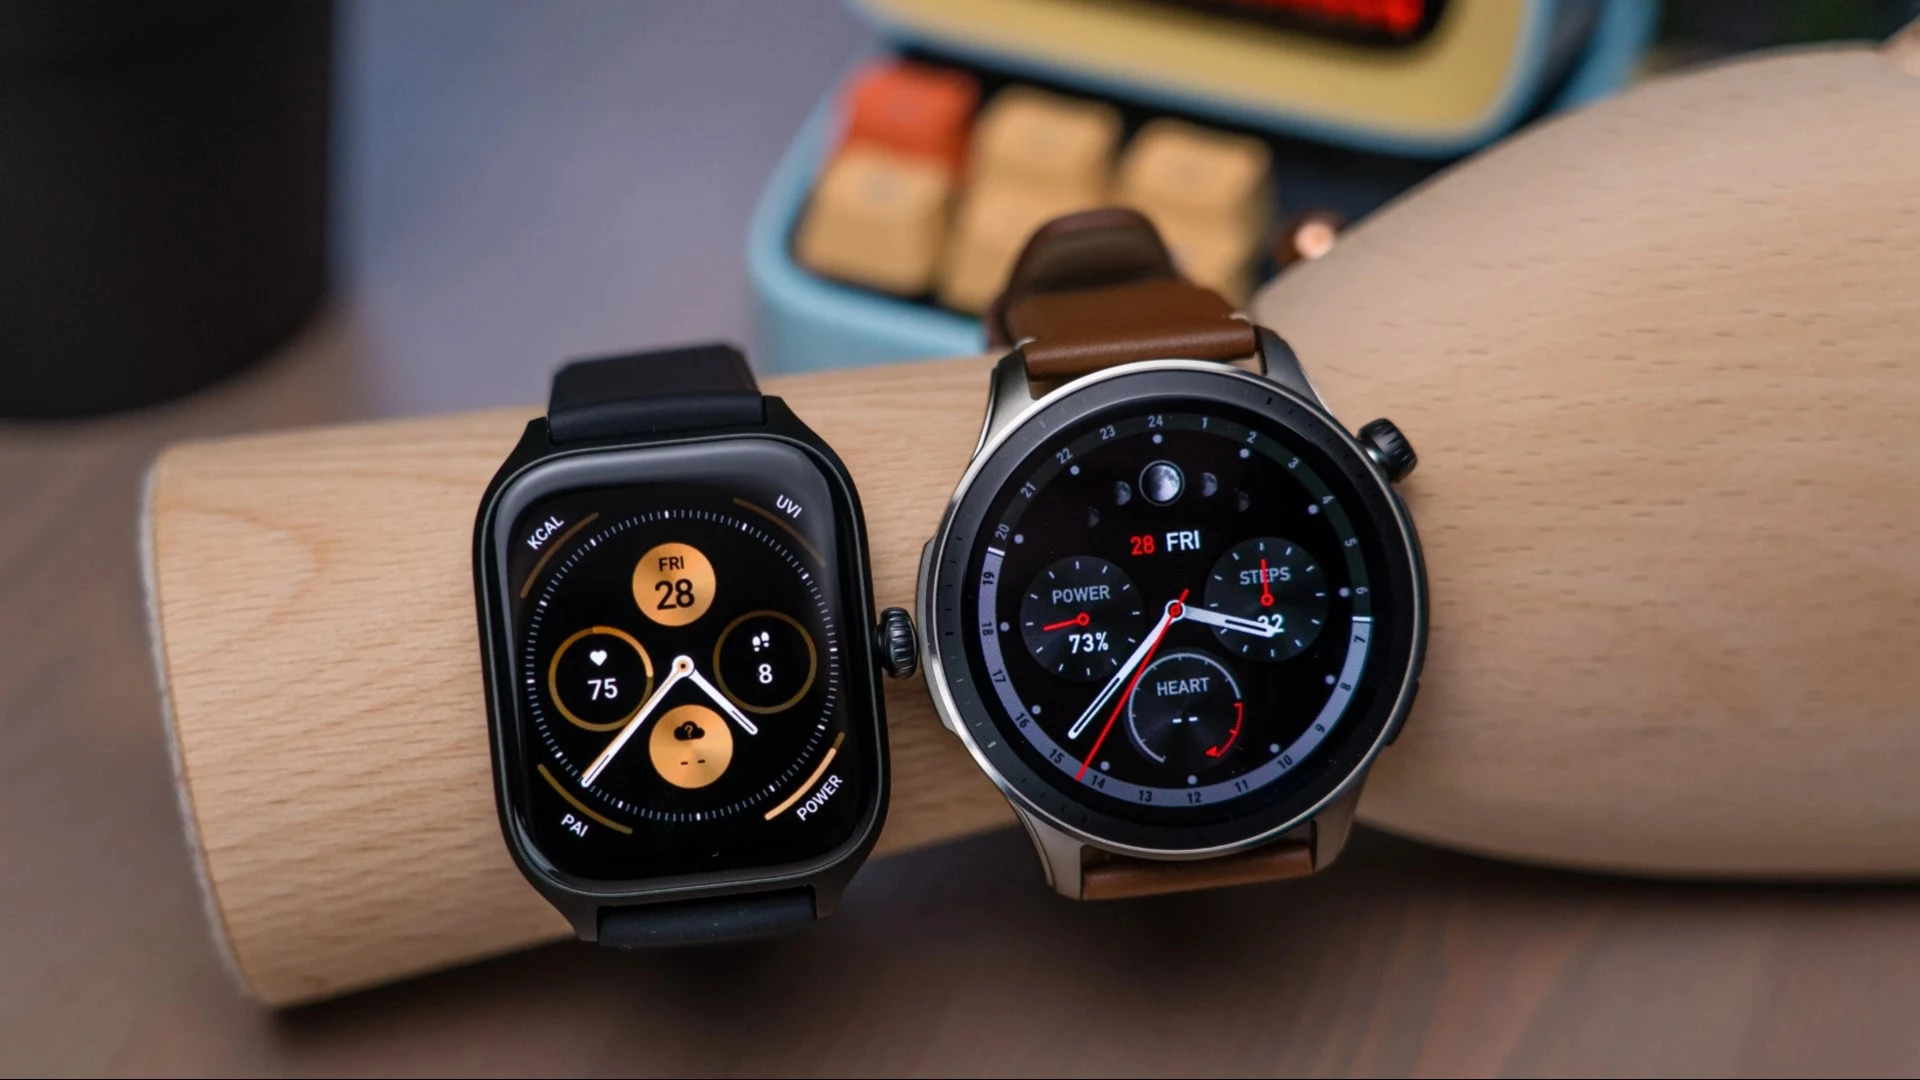 Here's what the new Amazfit GTR 4 and Amazfit GTS 4 will look like